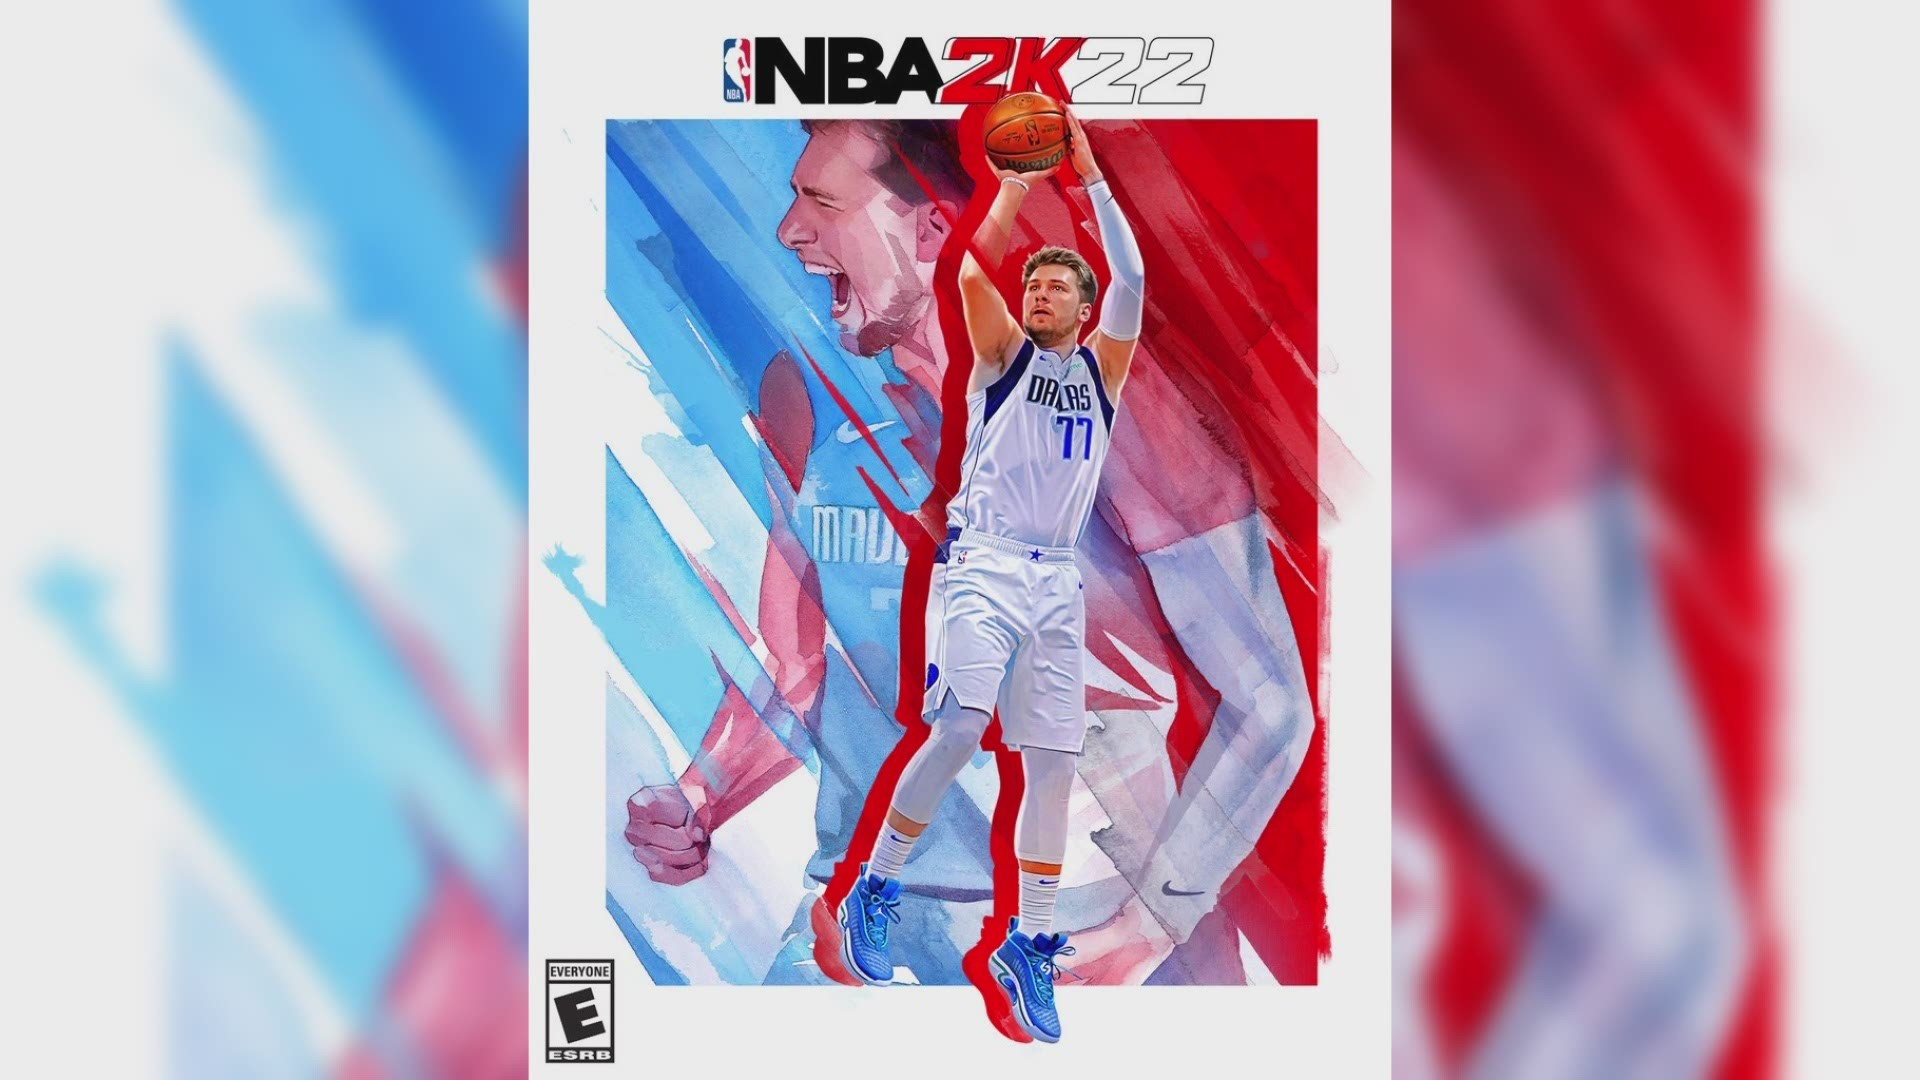 NBA 2K22: Luka, Dirk and Candace Parker grace cover